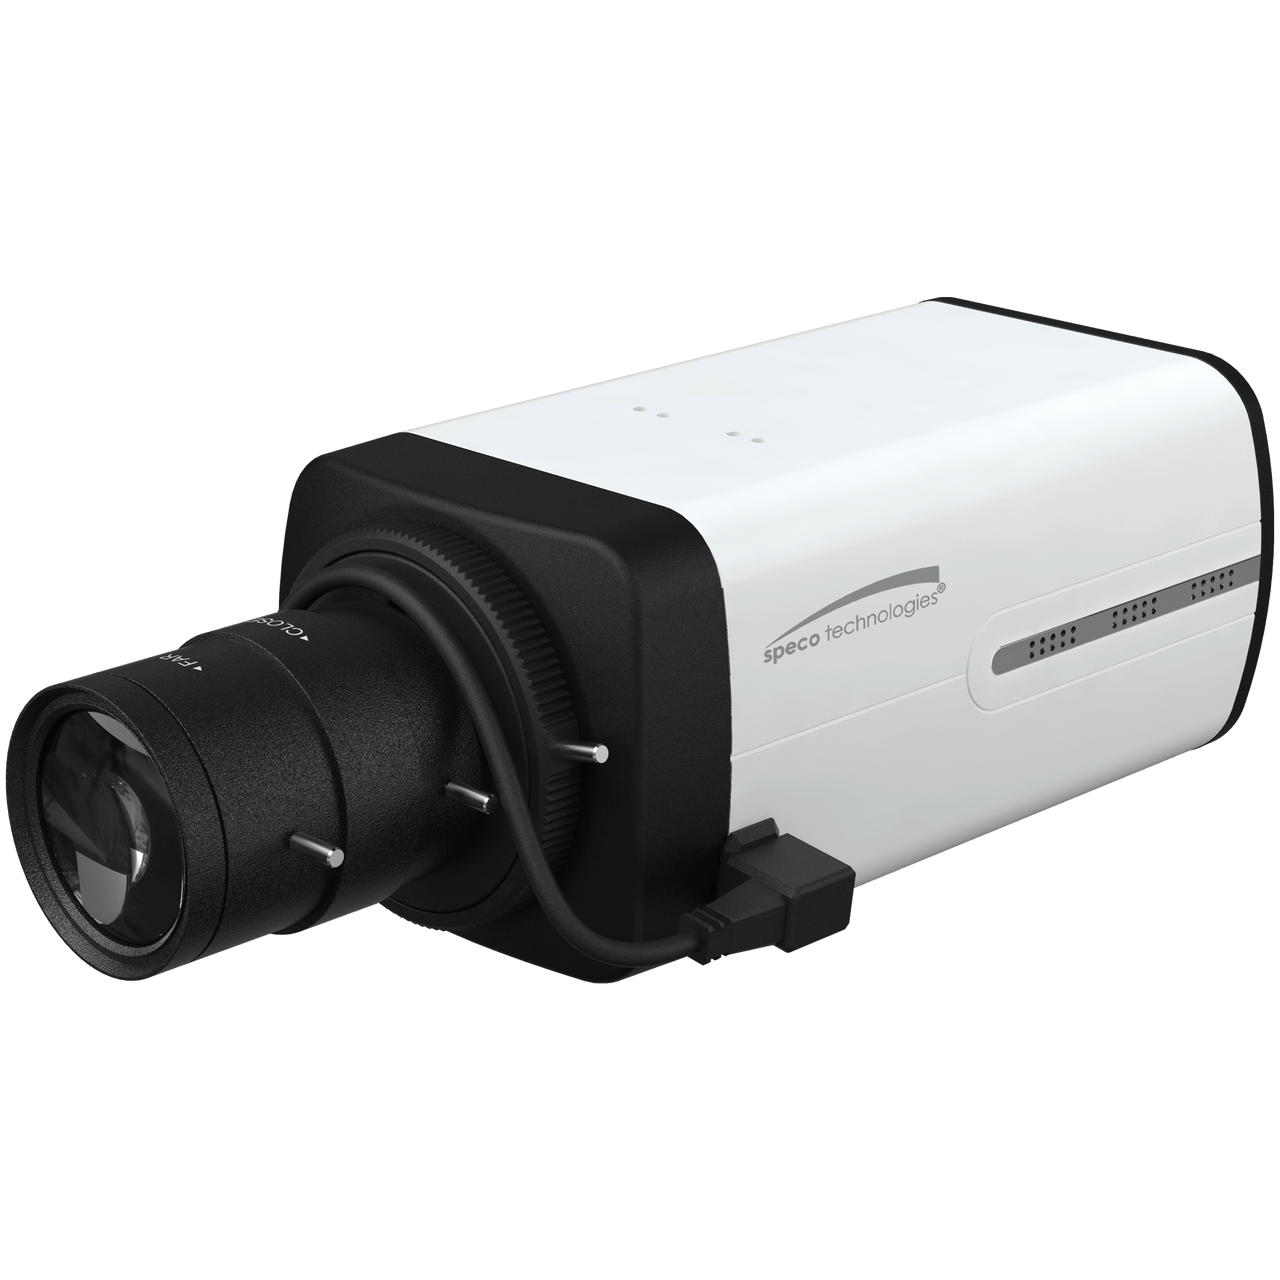 Speco Technologies O4T8 4MP Traditional IP Camera, uses CS type lens, White housing (O4T8)